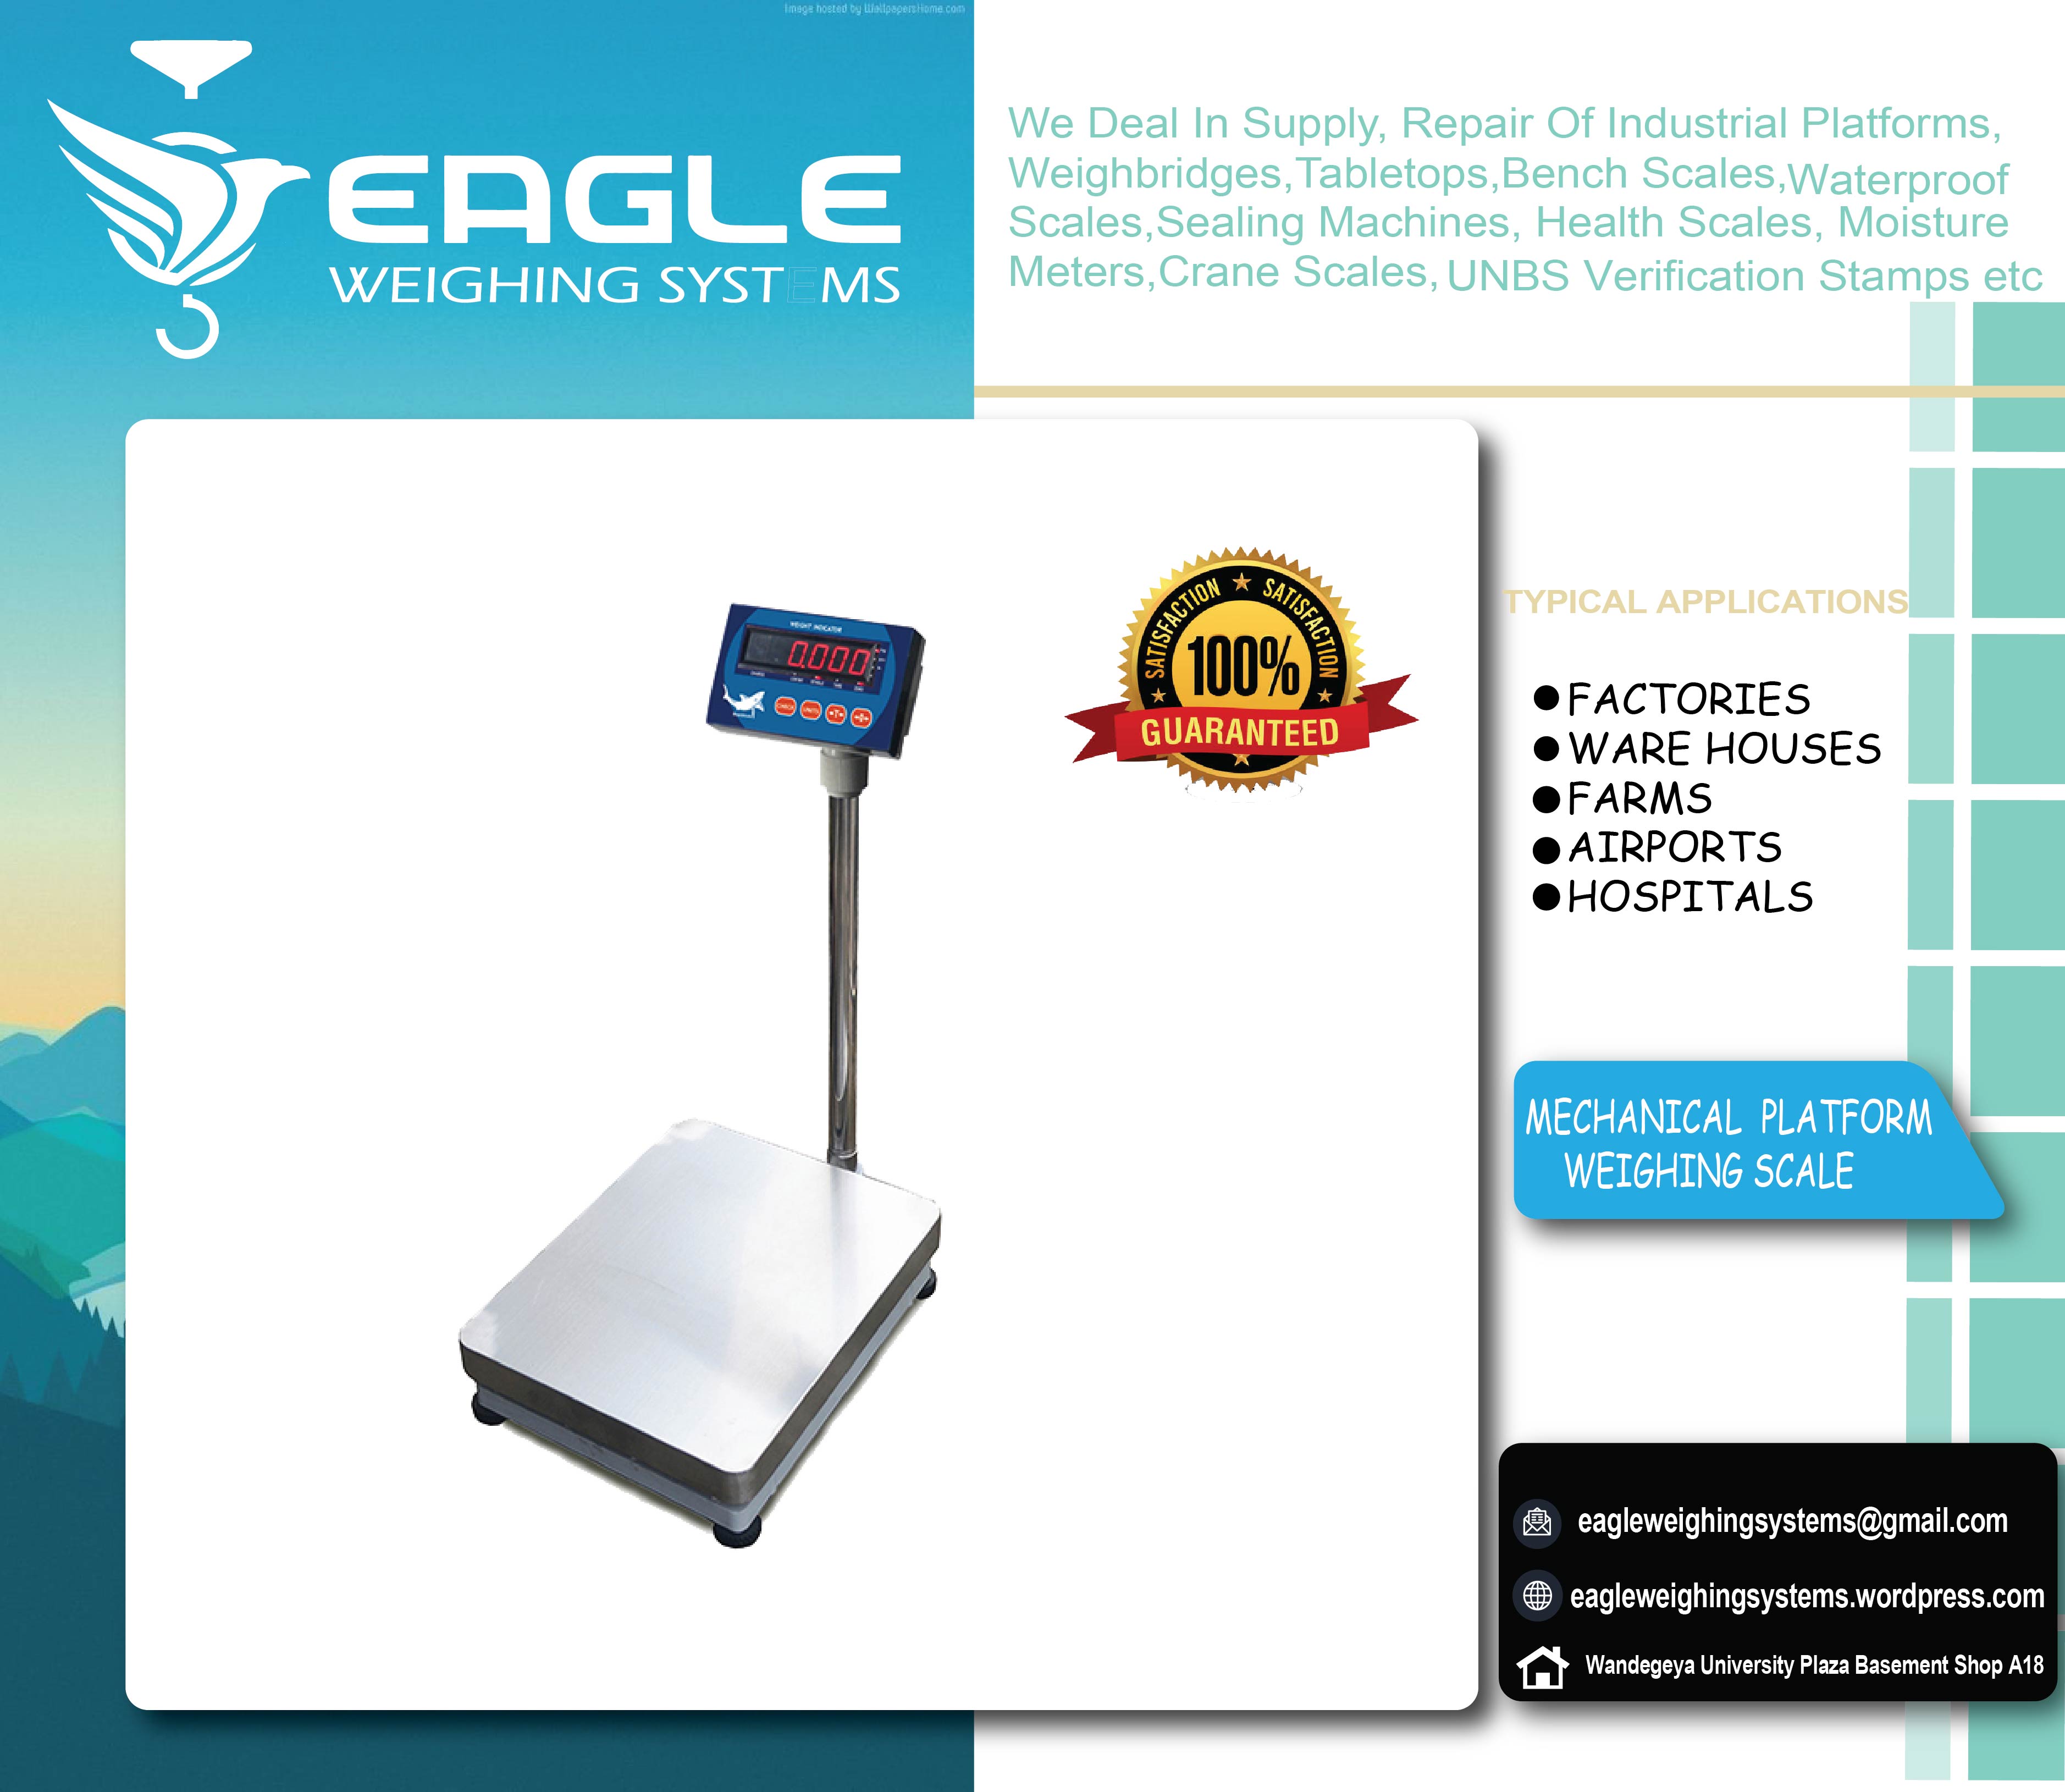 +256 (0) 700225423 Digital Counting Electronic Weighing Indicator Balance Scale, Kampala Central Division, Central, Uganda